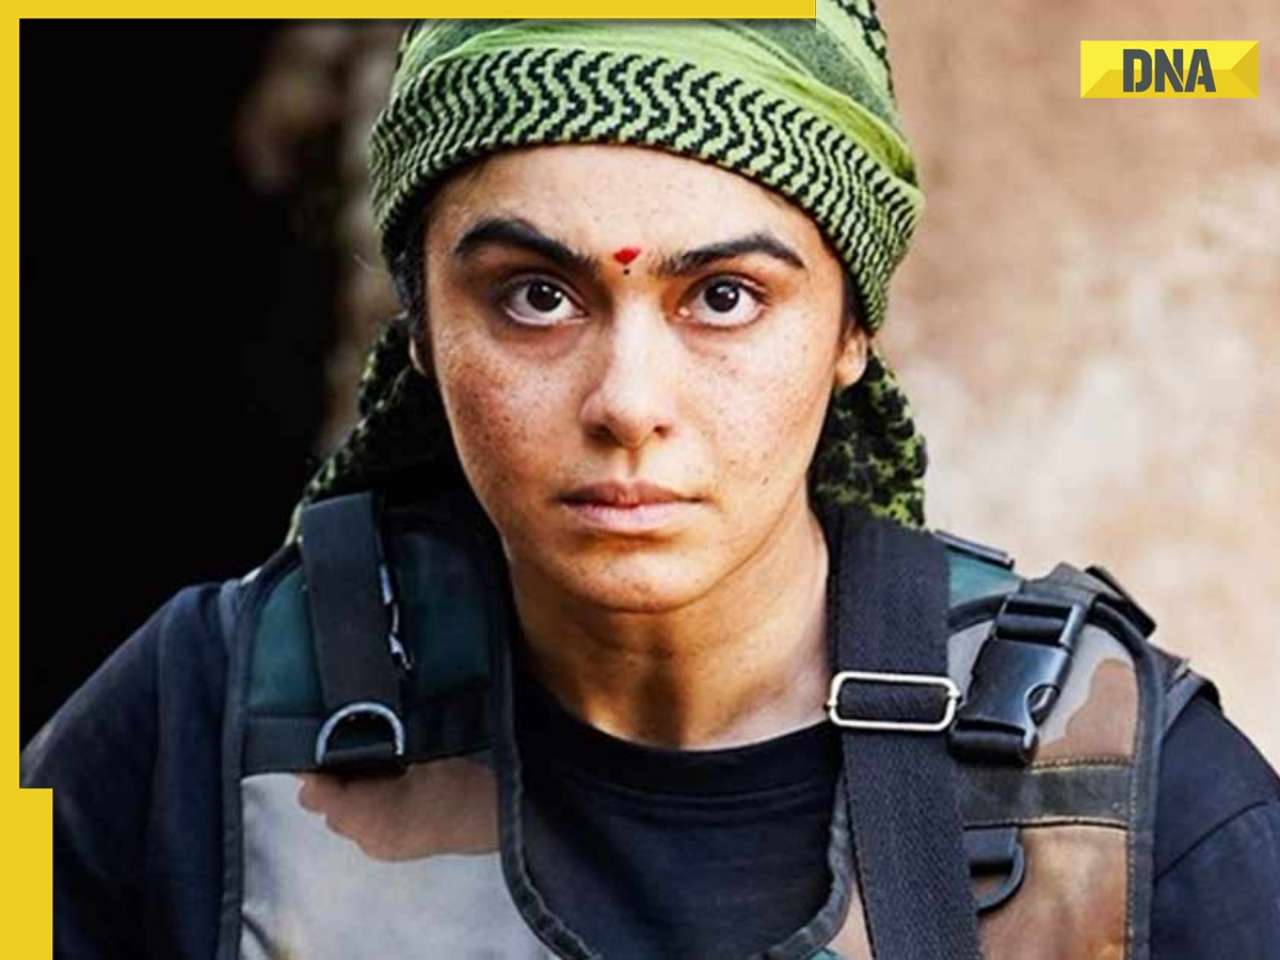 Bastar The Naxal Story box office collection day 1: Adah Sharma-starrer opens to a poor start, collects only Rs 50 lakh